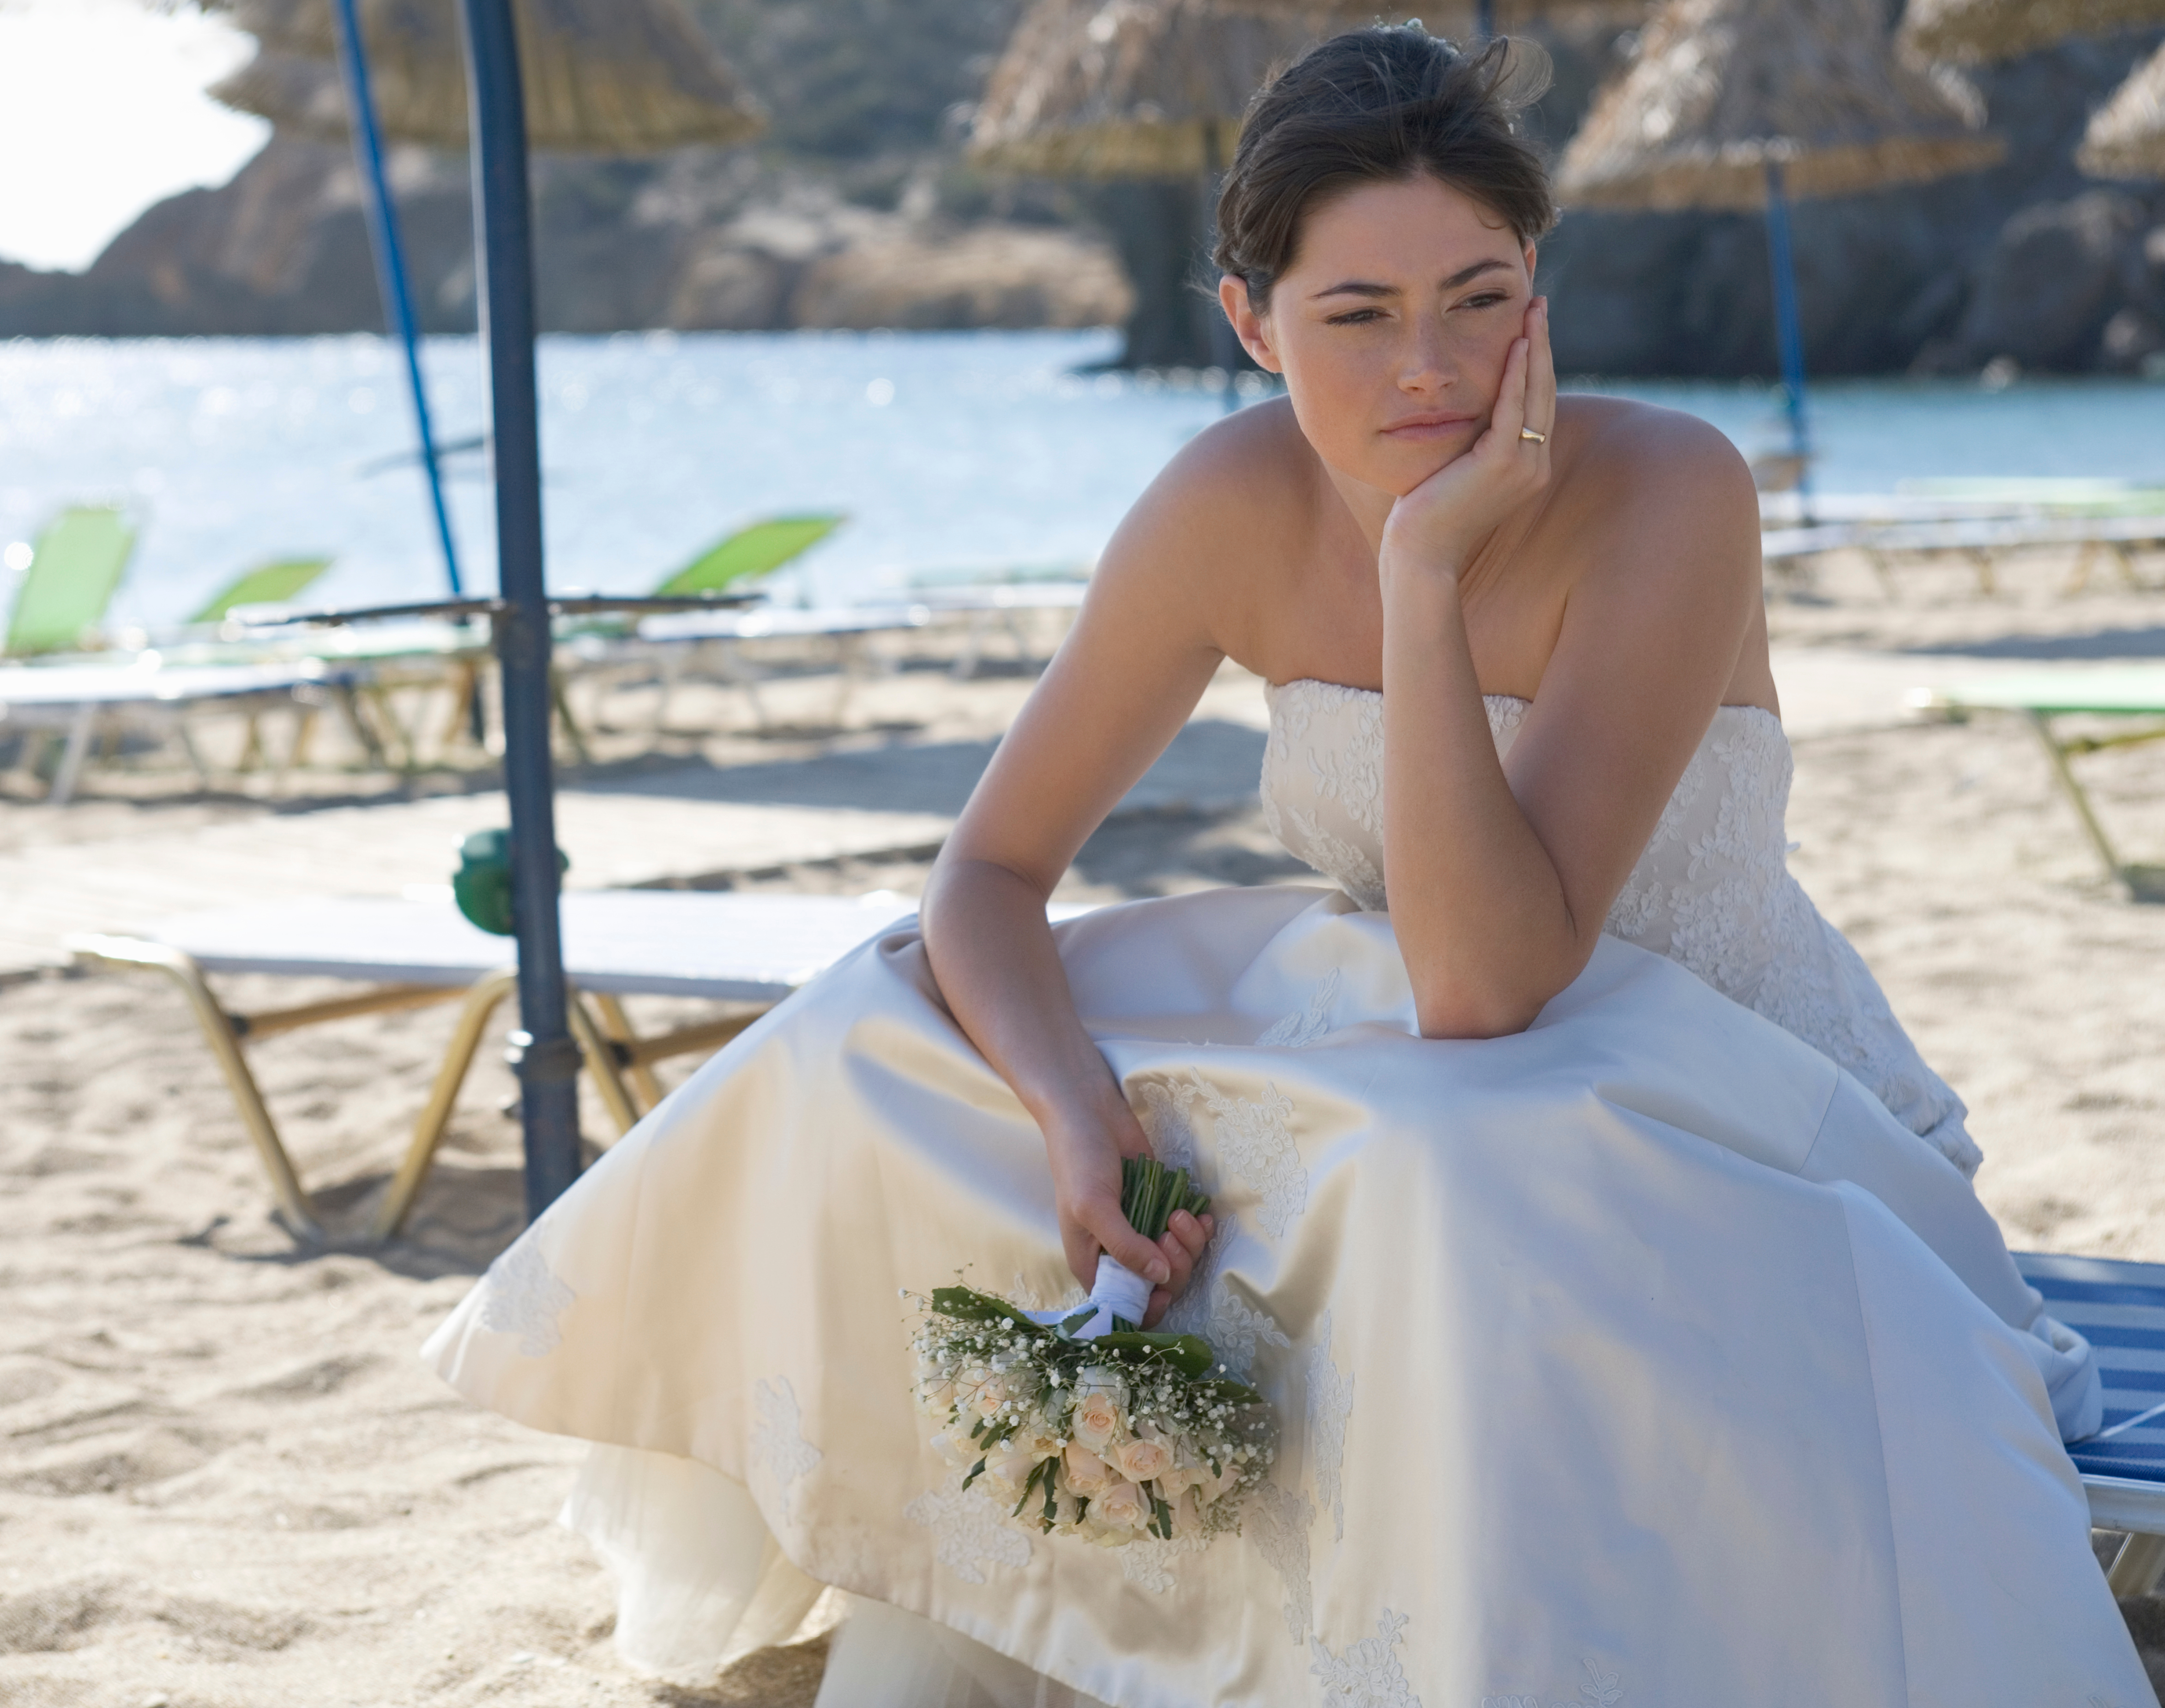 An image of a bride looking forlorn and disappointed on her special day | Source: Shutterstock